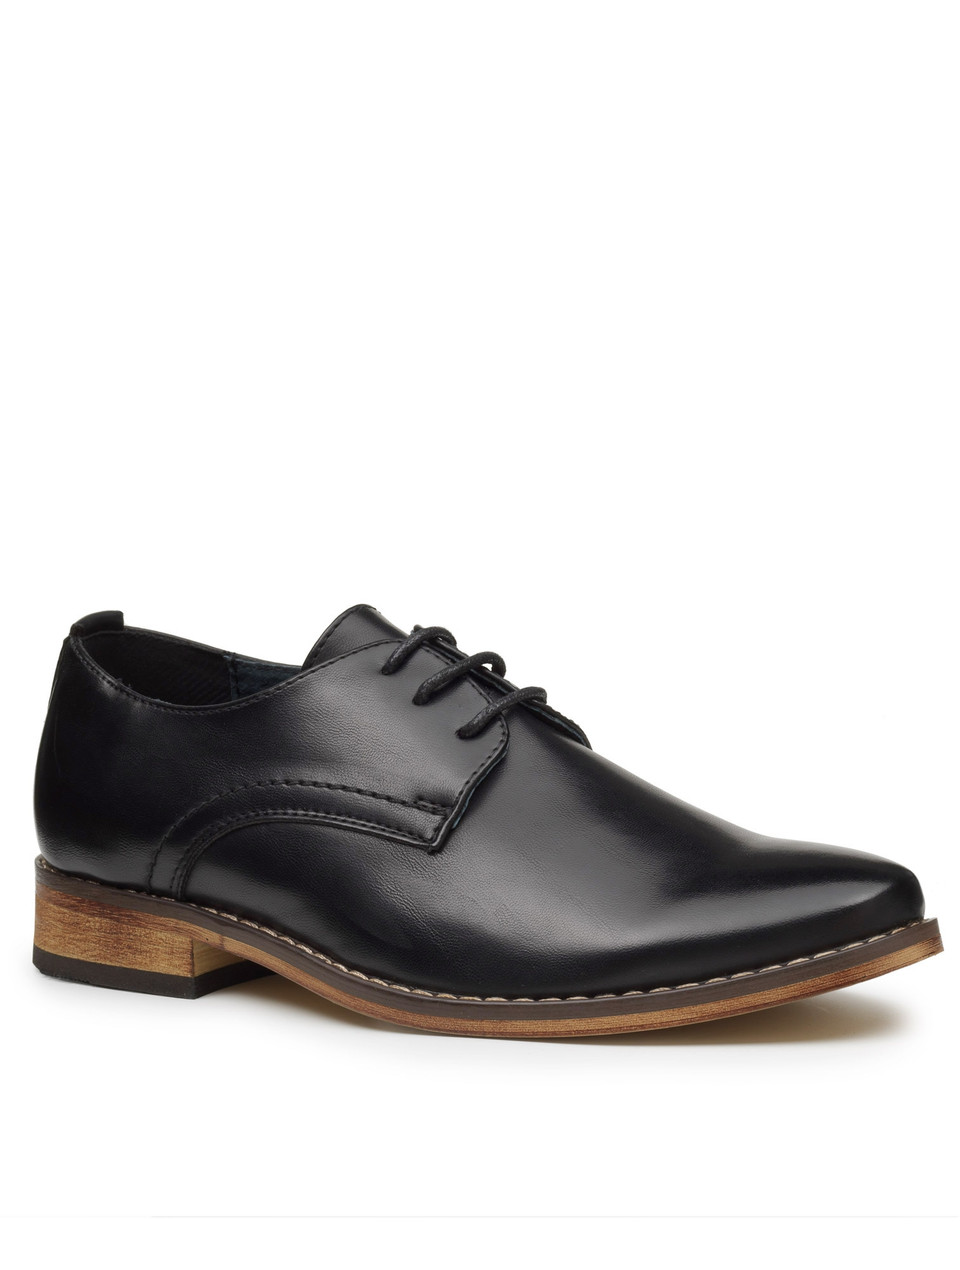 Boys Black Leather Shoes | Boys Occasion Wear Shoes | Boys Holy ...